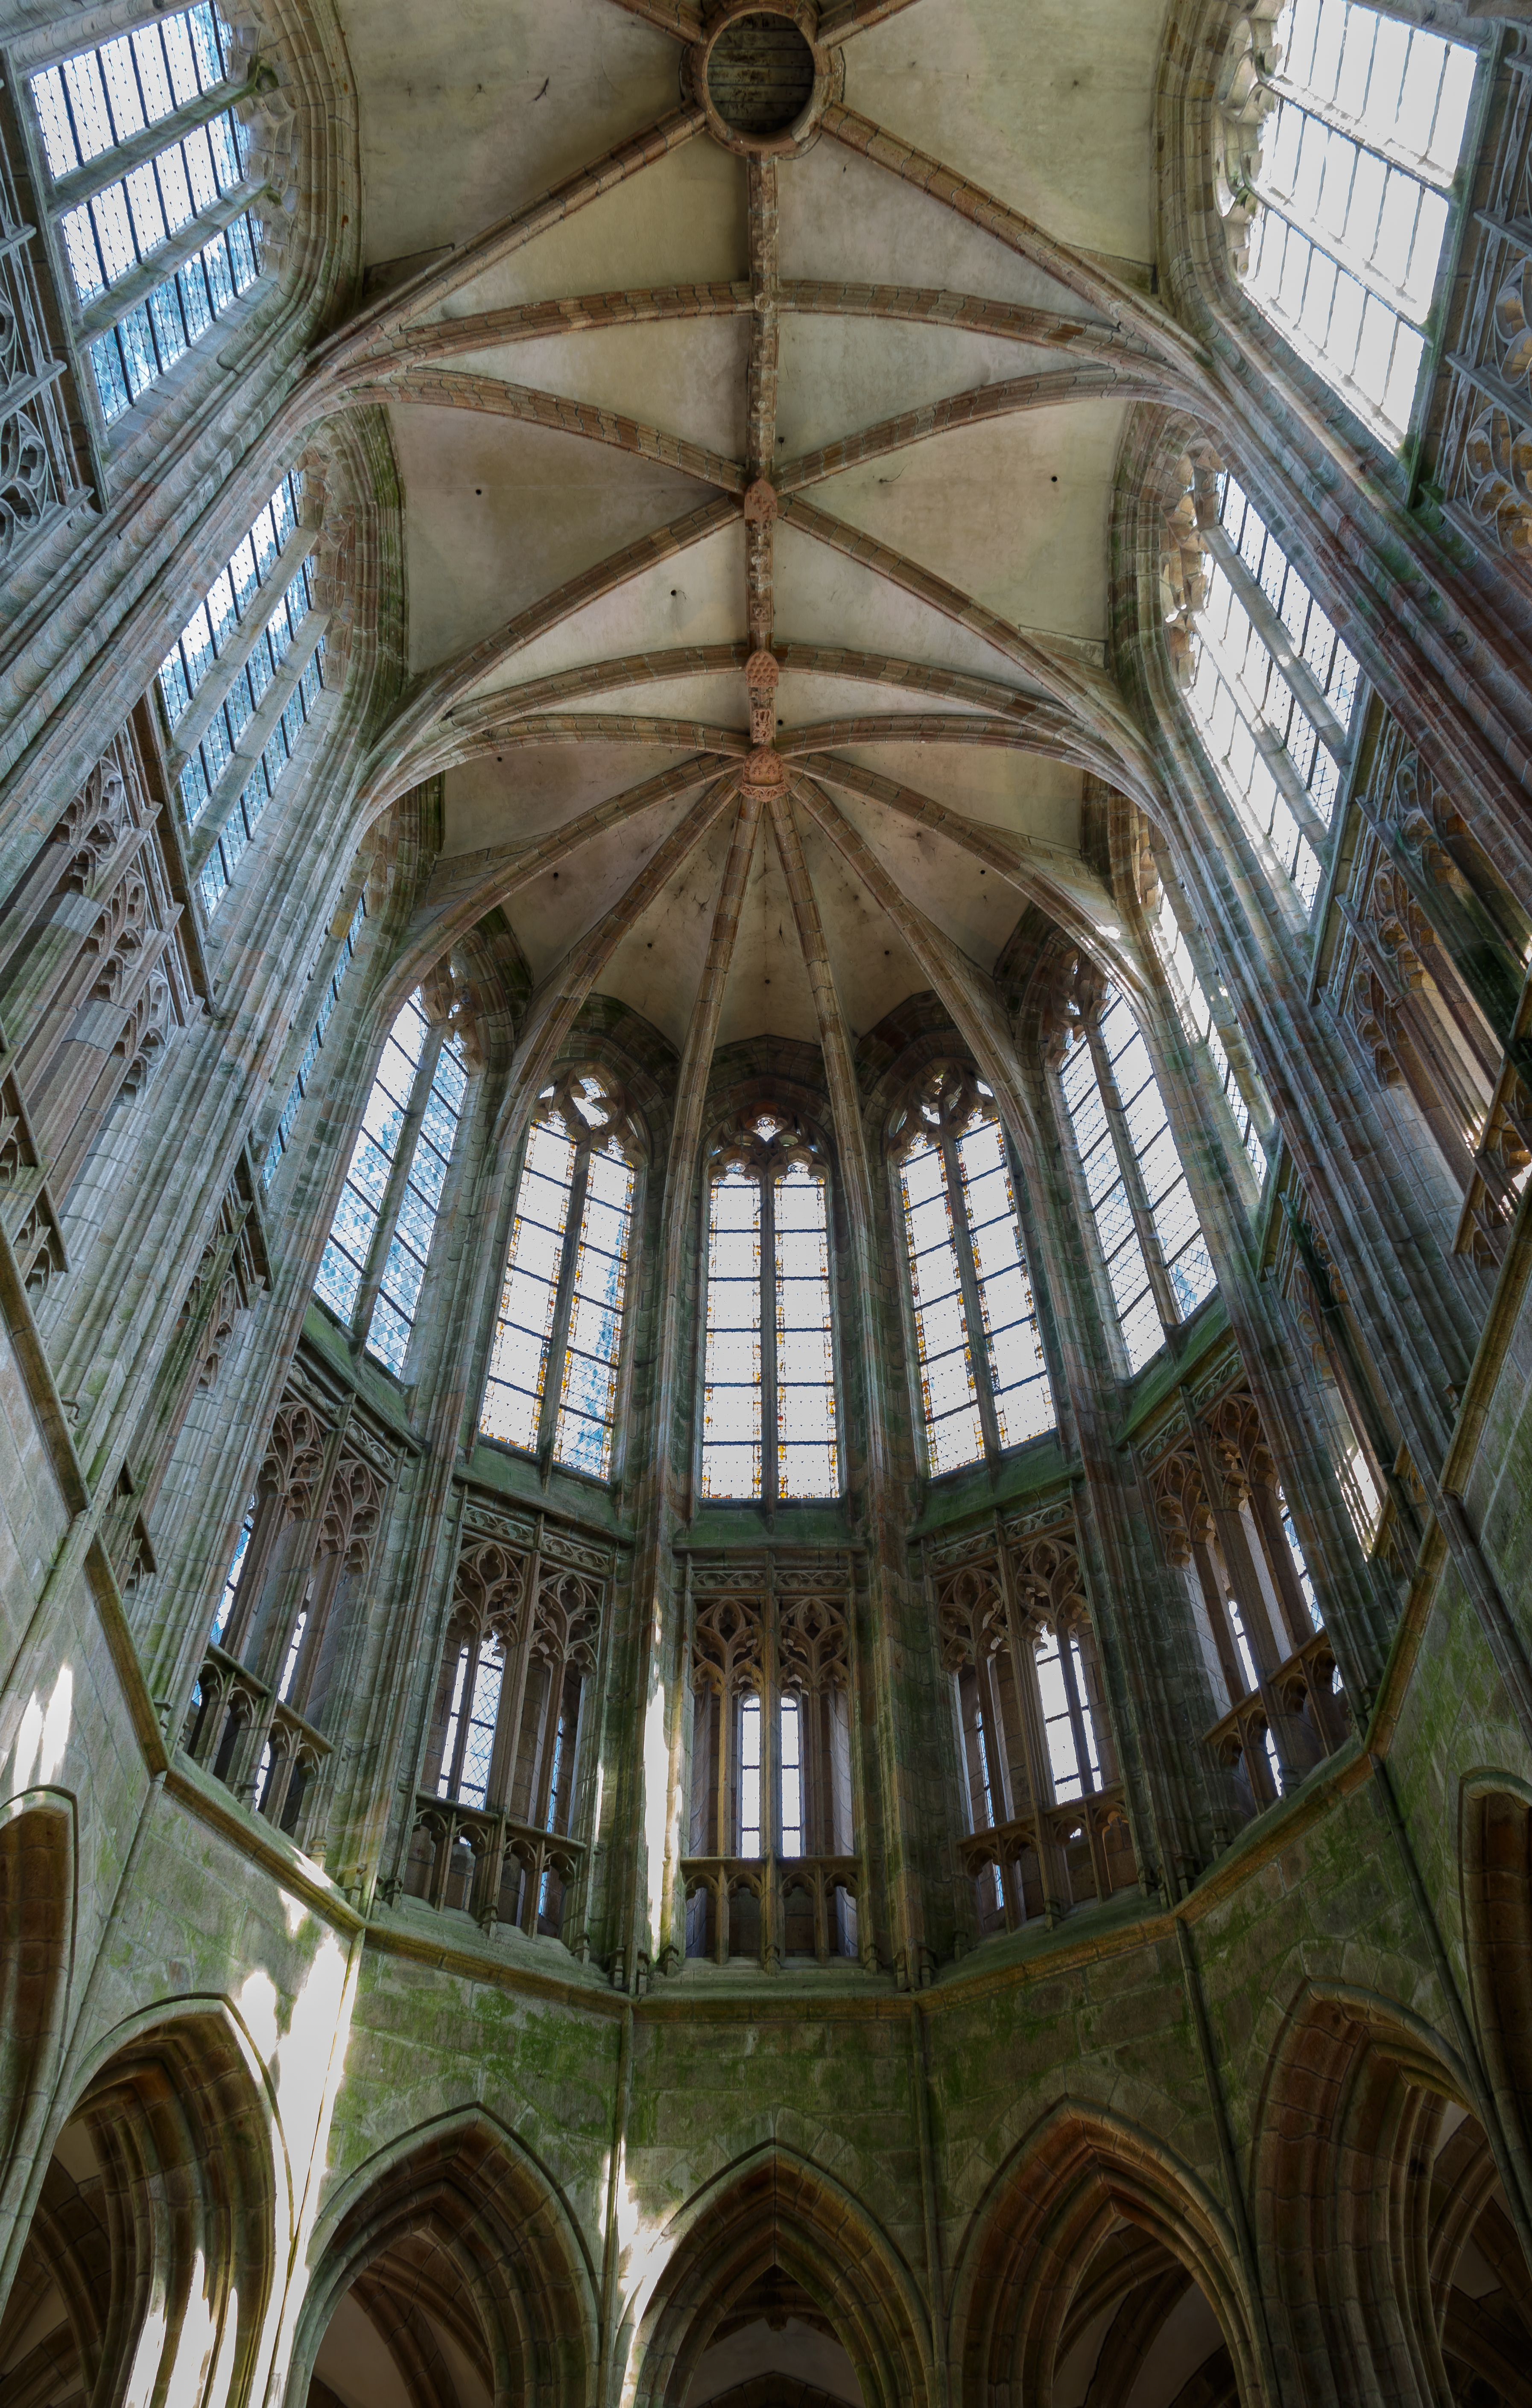 Le Mont-Saint-Michel France Abbey-Church: The domed-roof of the church with arched glass windows. 